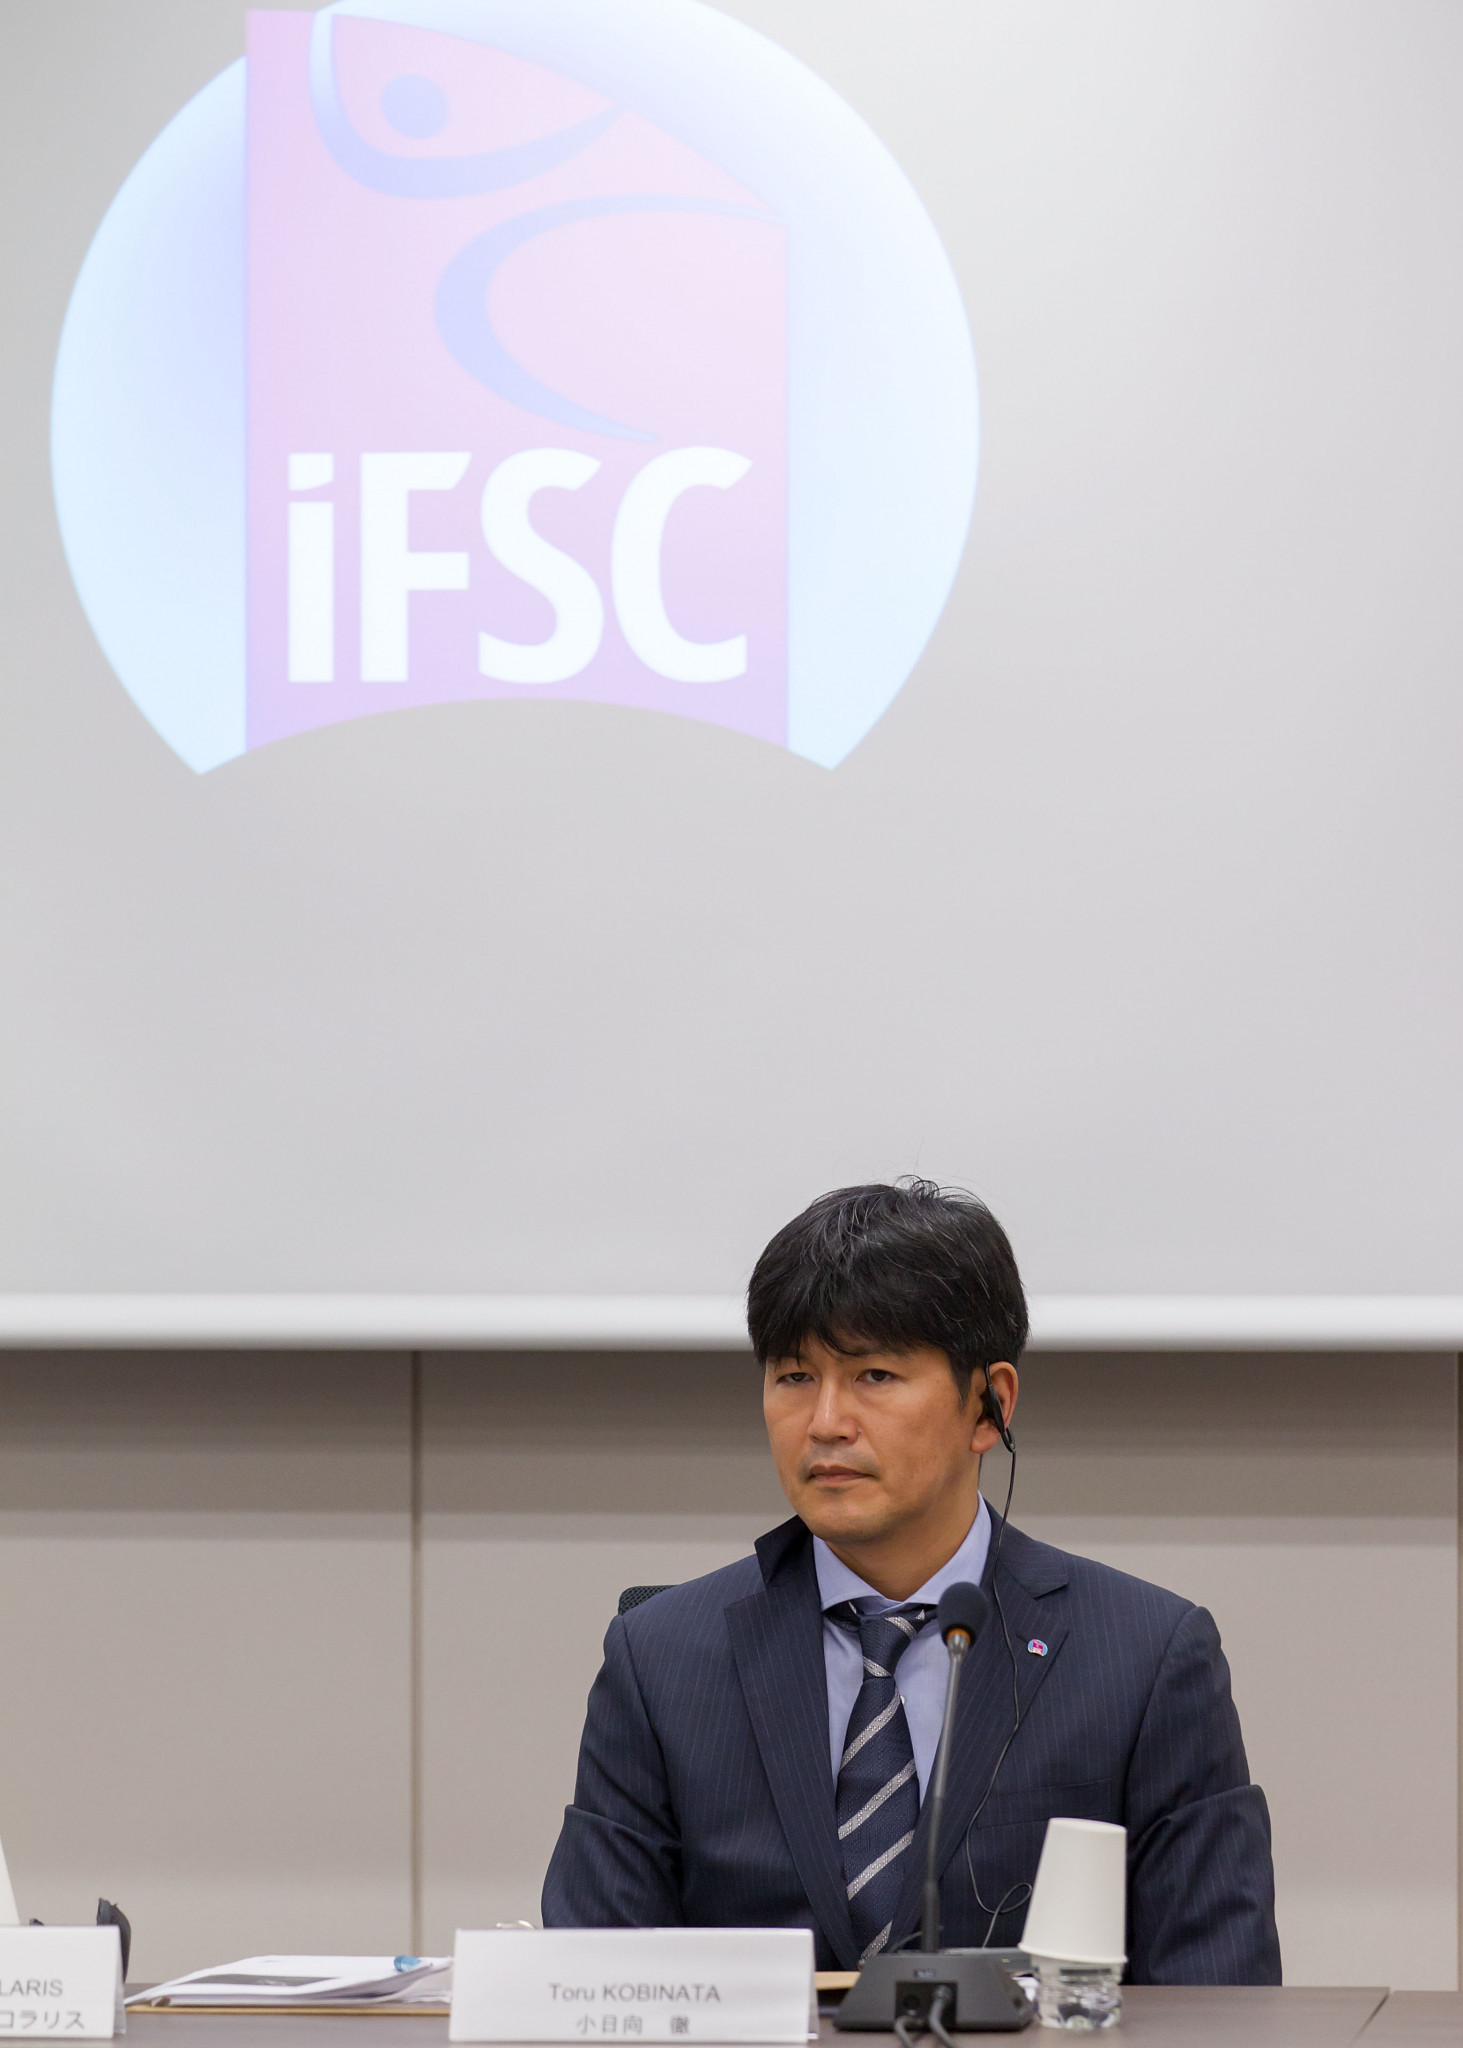 IFSC vice-president Toru Kobinata is one of the members of the panel ©Getty Images